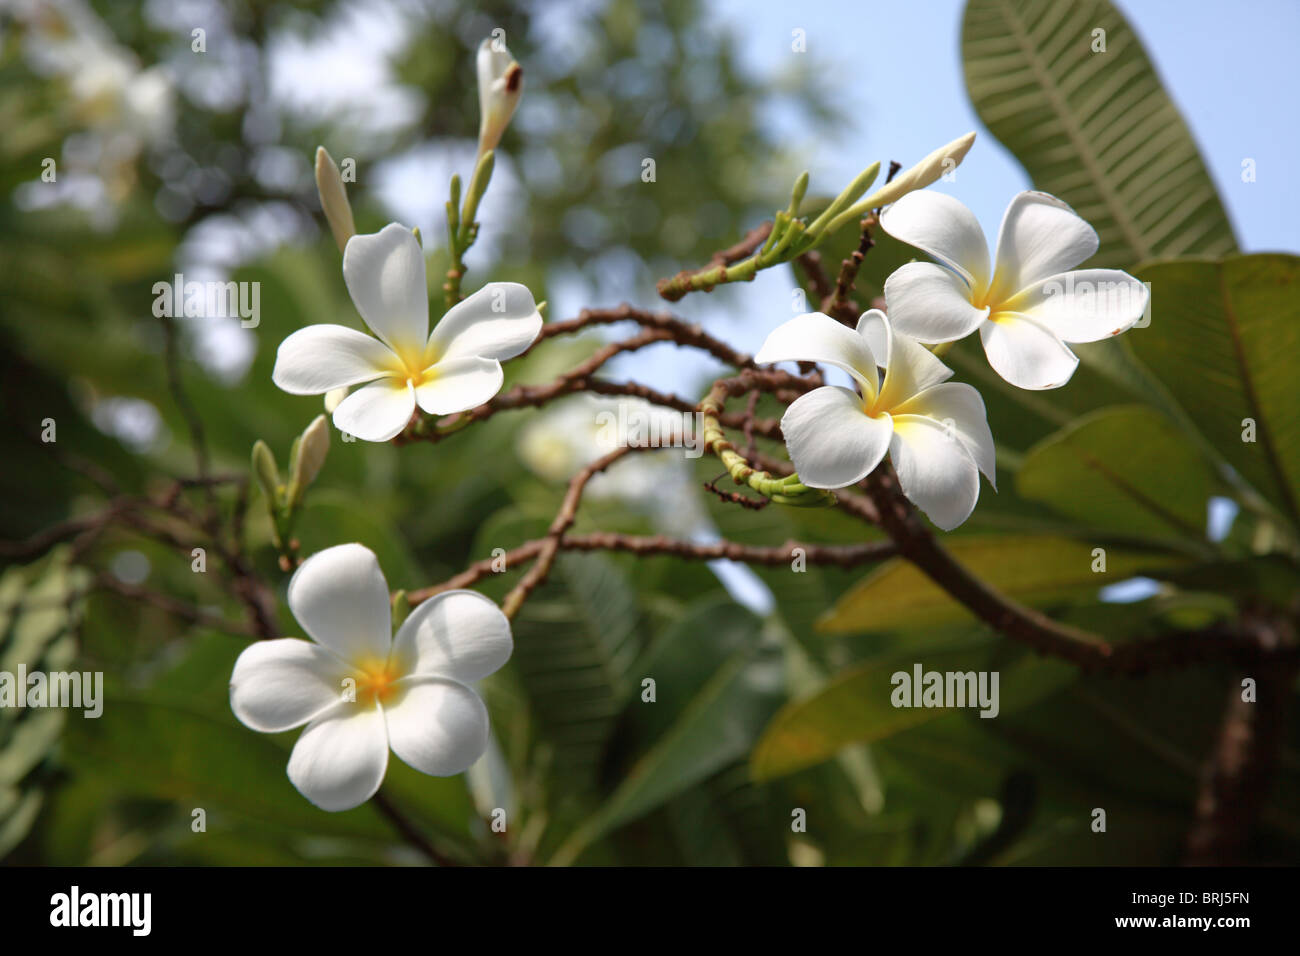 Frangipani flower, seen at Wat Pho in Thailand Stock Photo